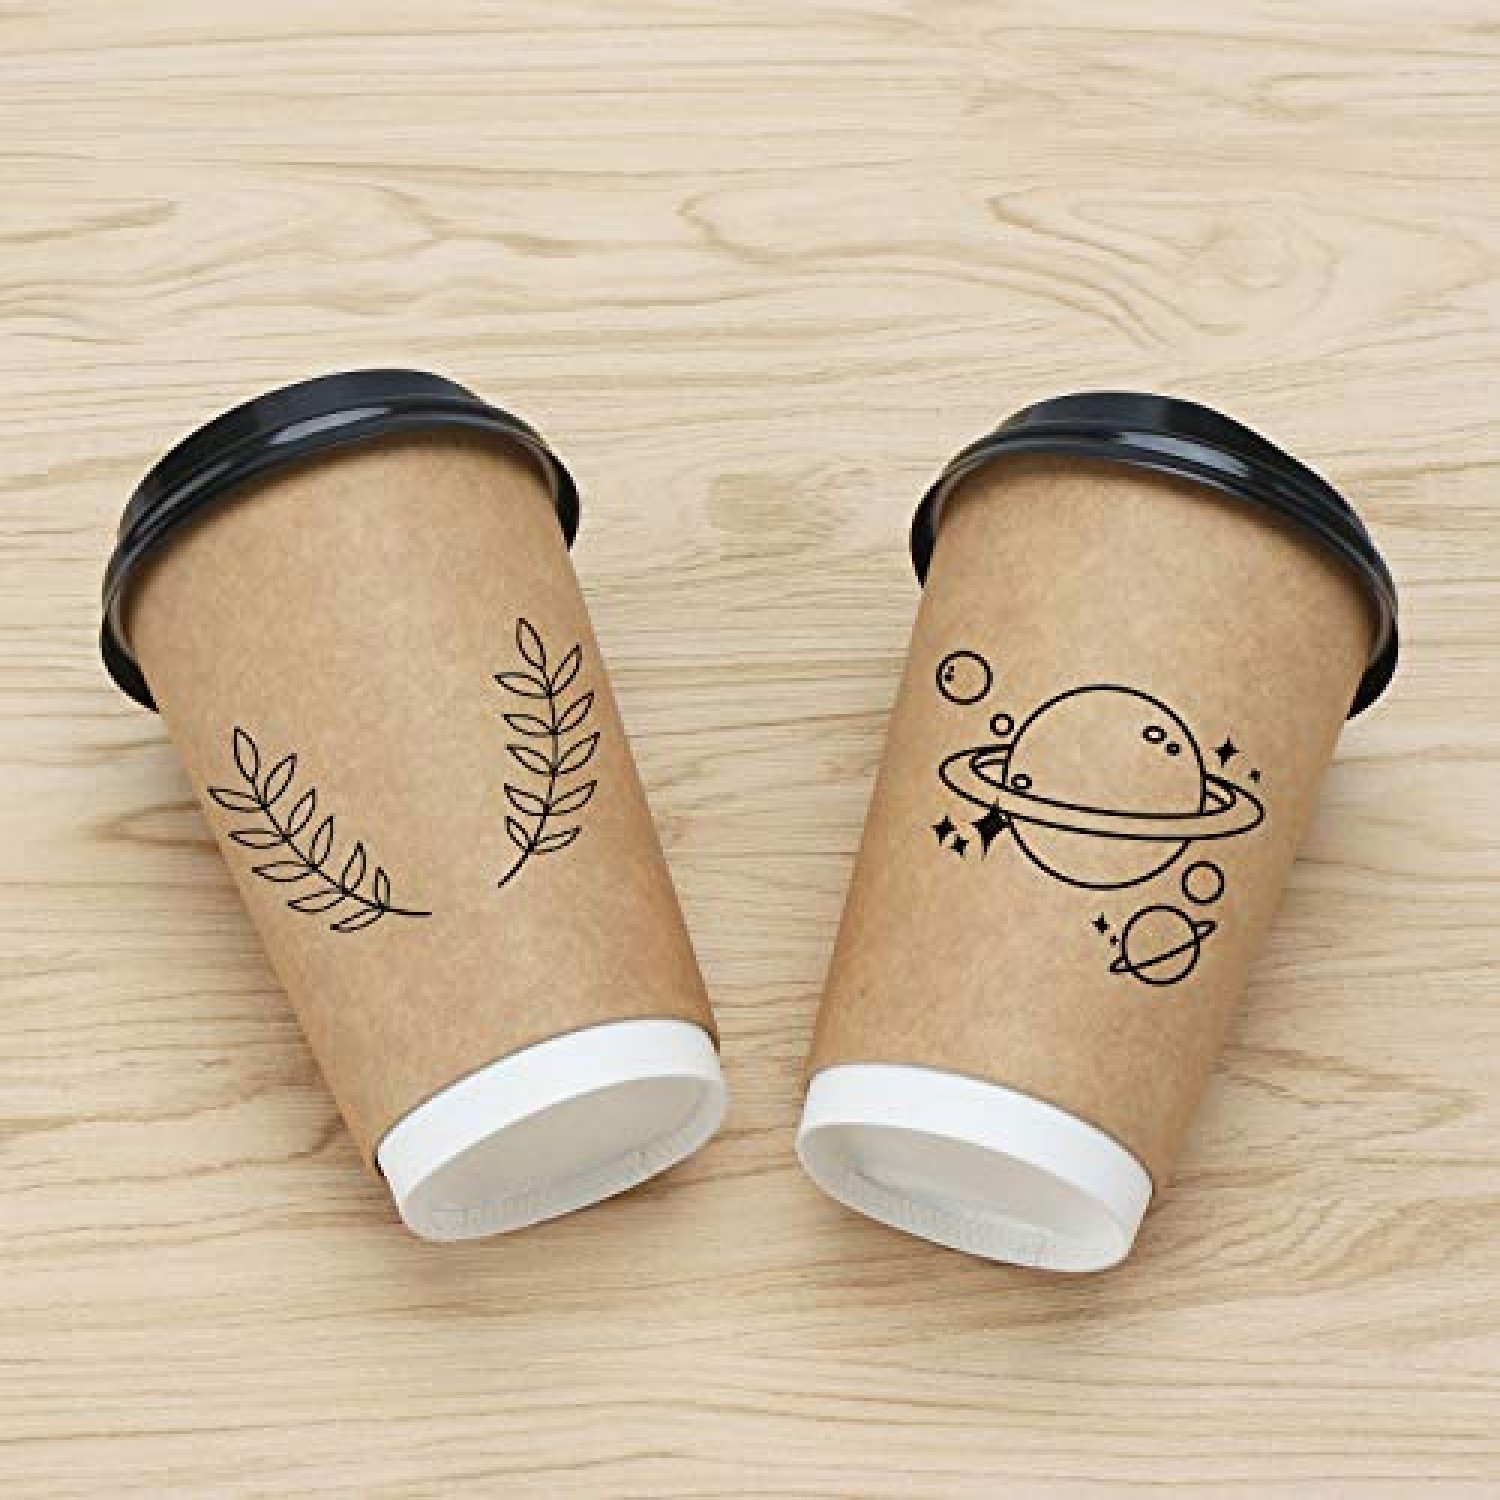 Disposable Bamboo Lids for Coffee & Tea Cups Fits Size 12,16,... Details about   E3 Snap Lids 